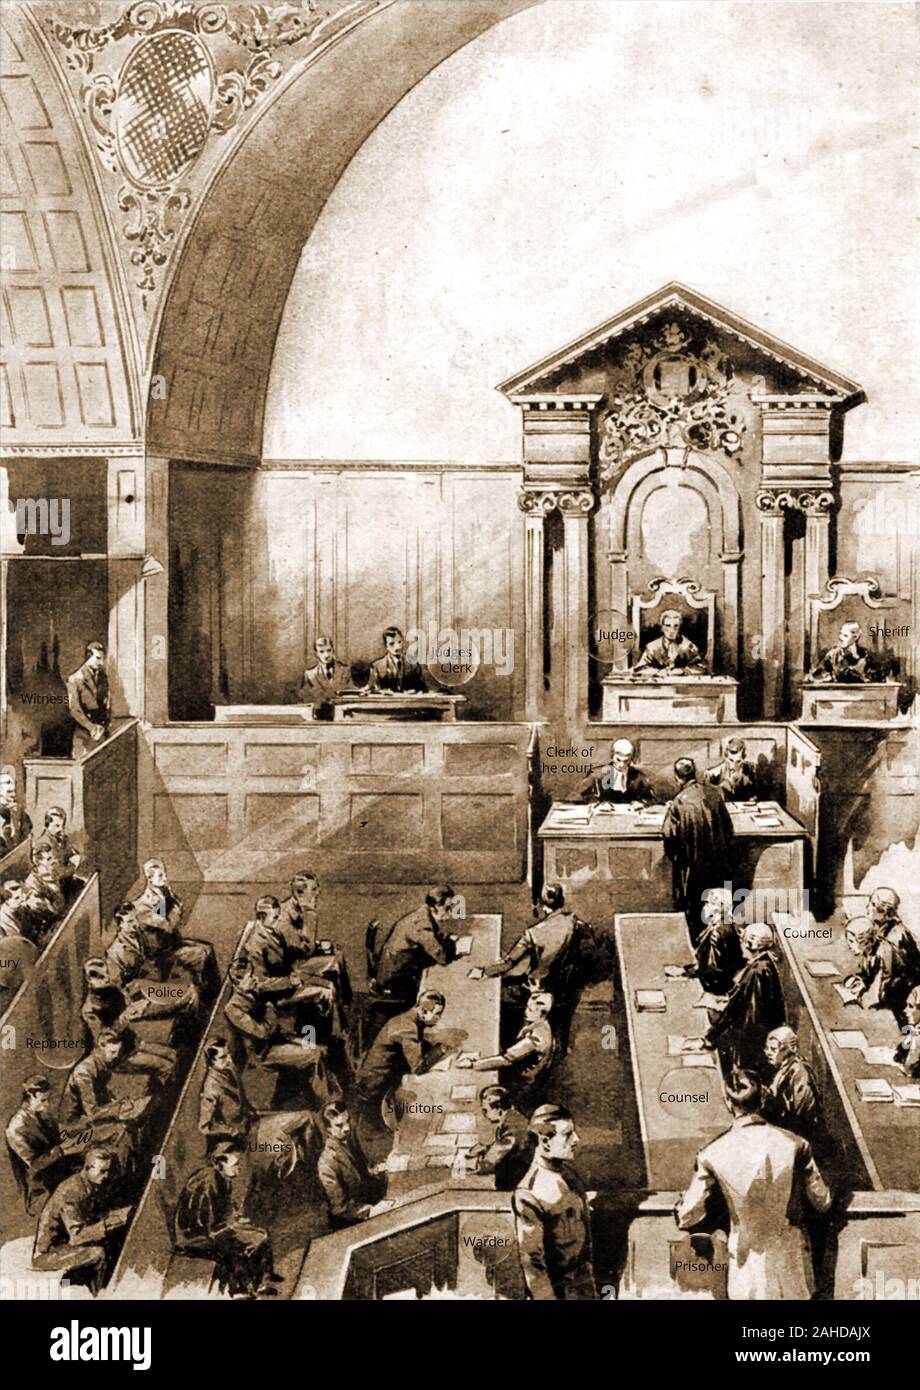 A 1940's illustration showing the scene in a typical British criminal courtroom of the time, with all the principle persons named. Stock Photo